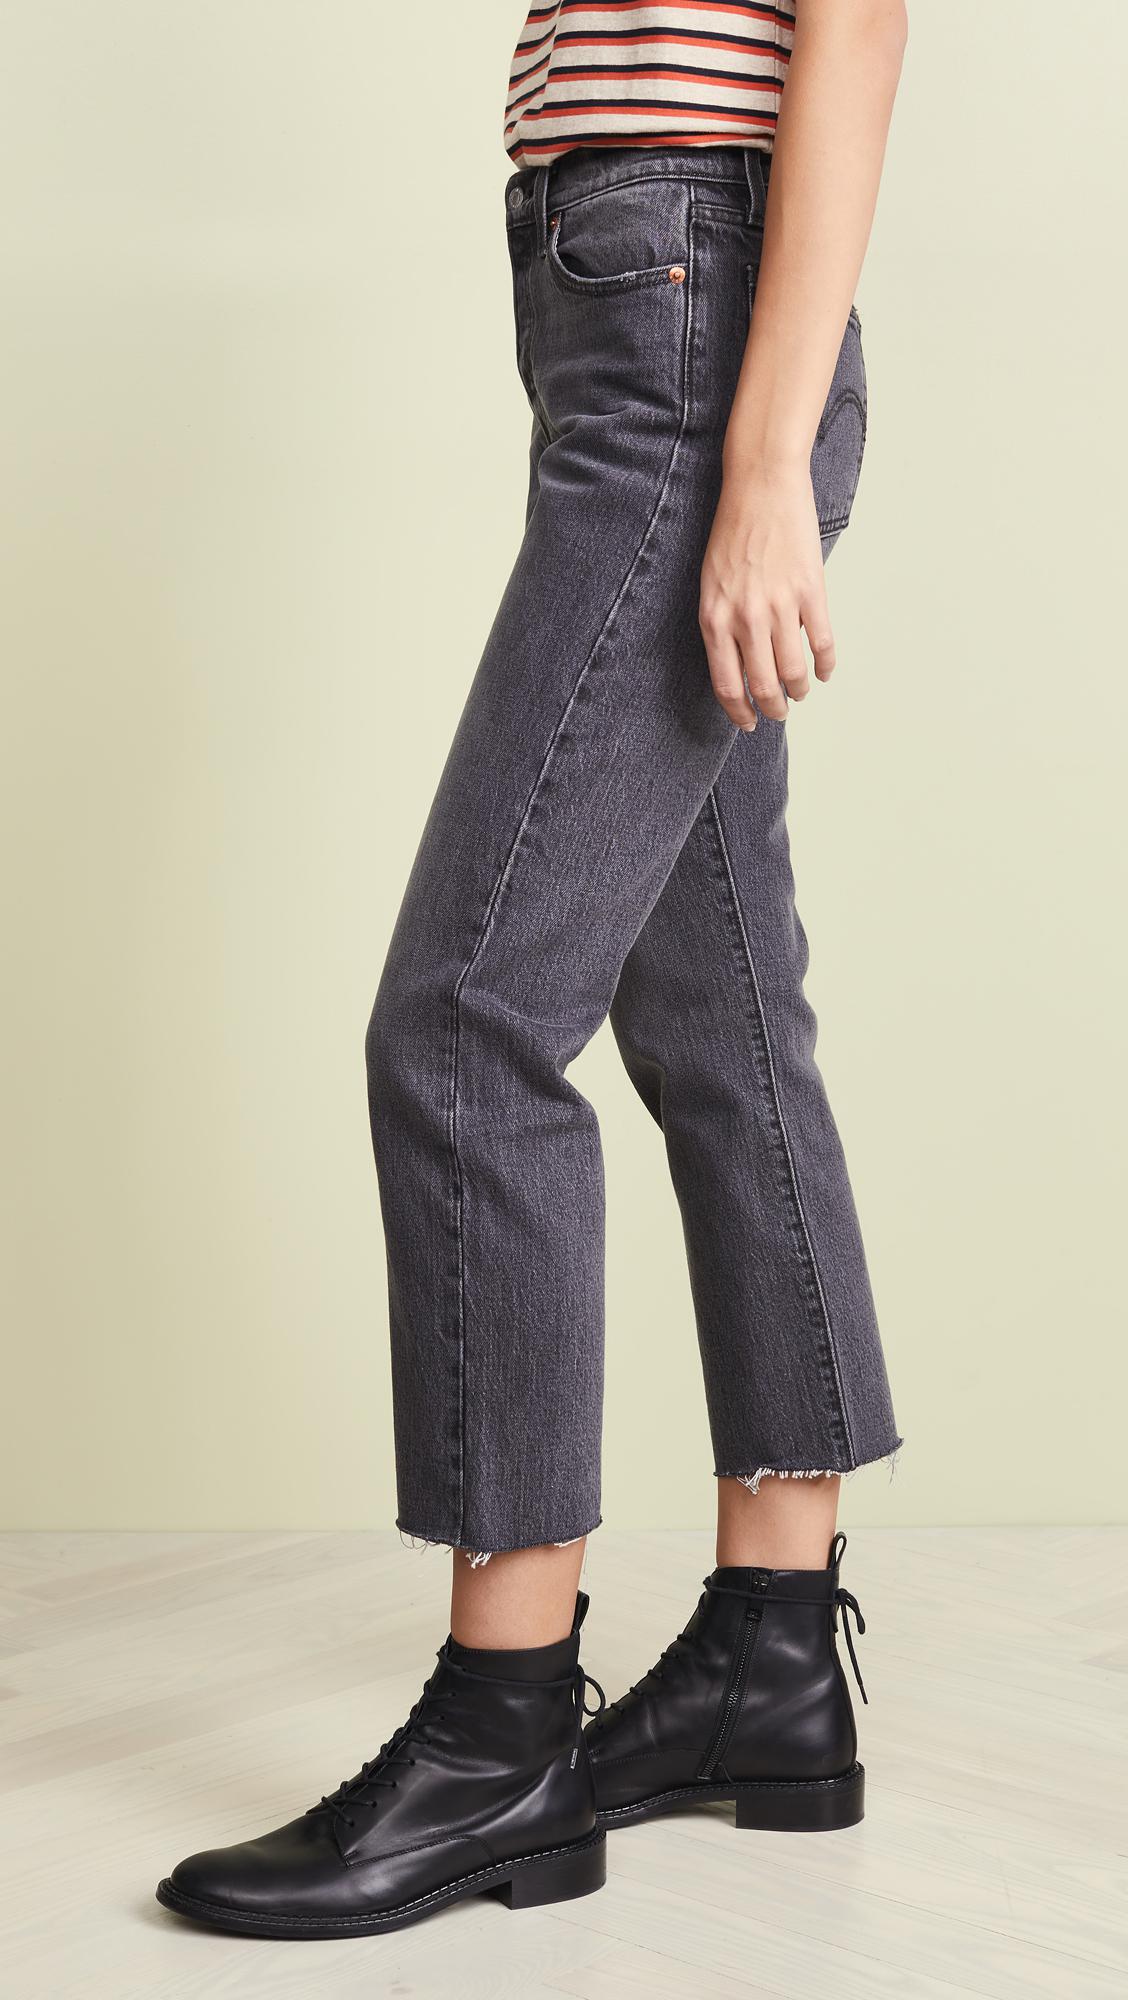 Levi's Wedgie Straight Jeans in Black | Lyst